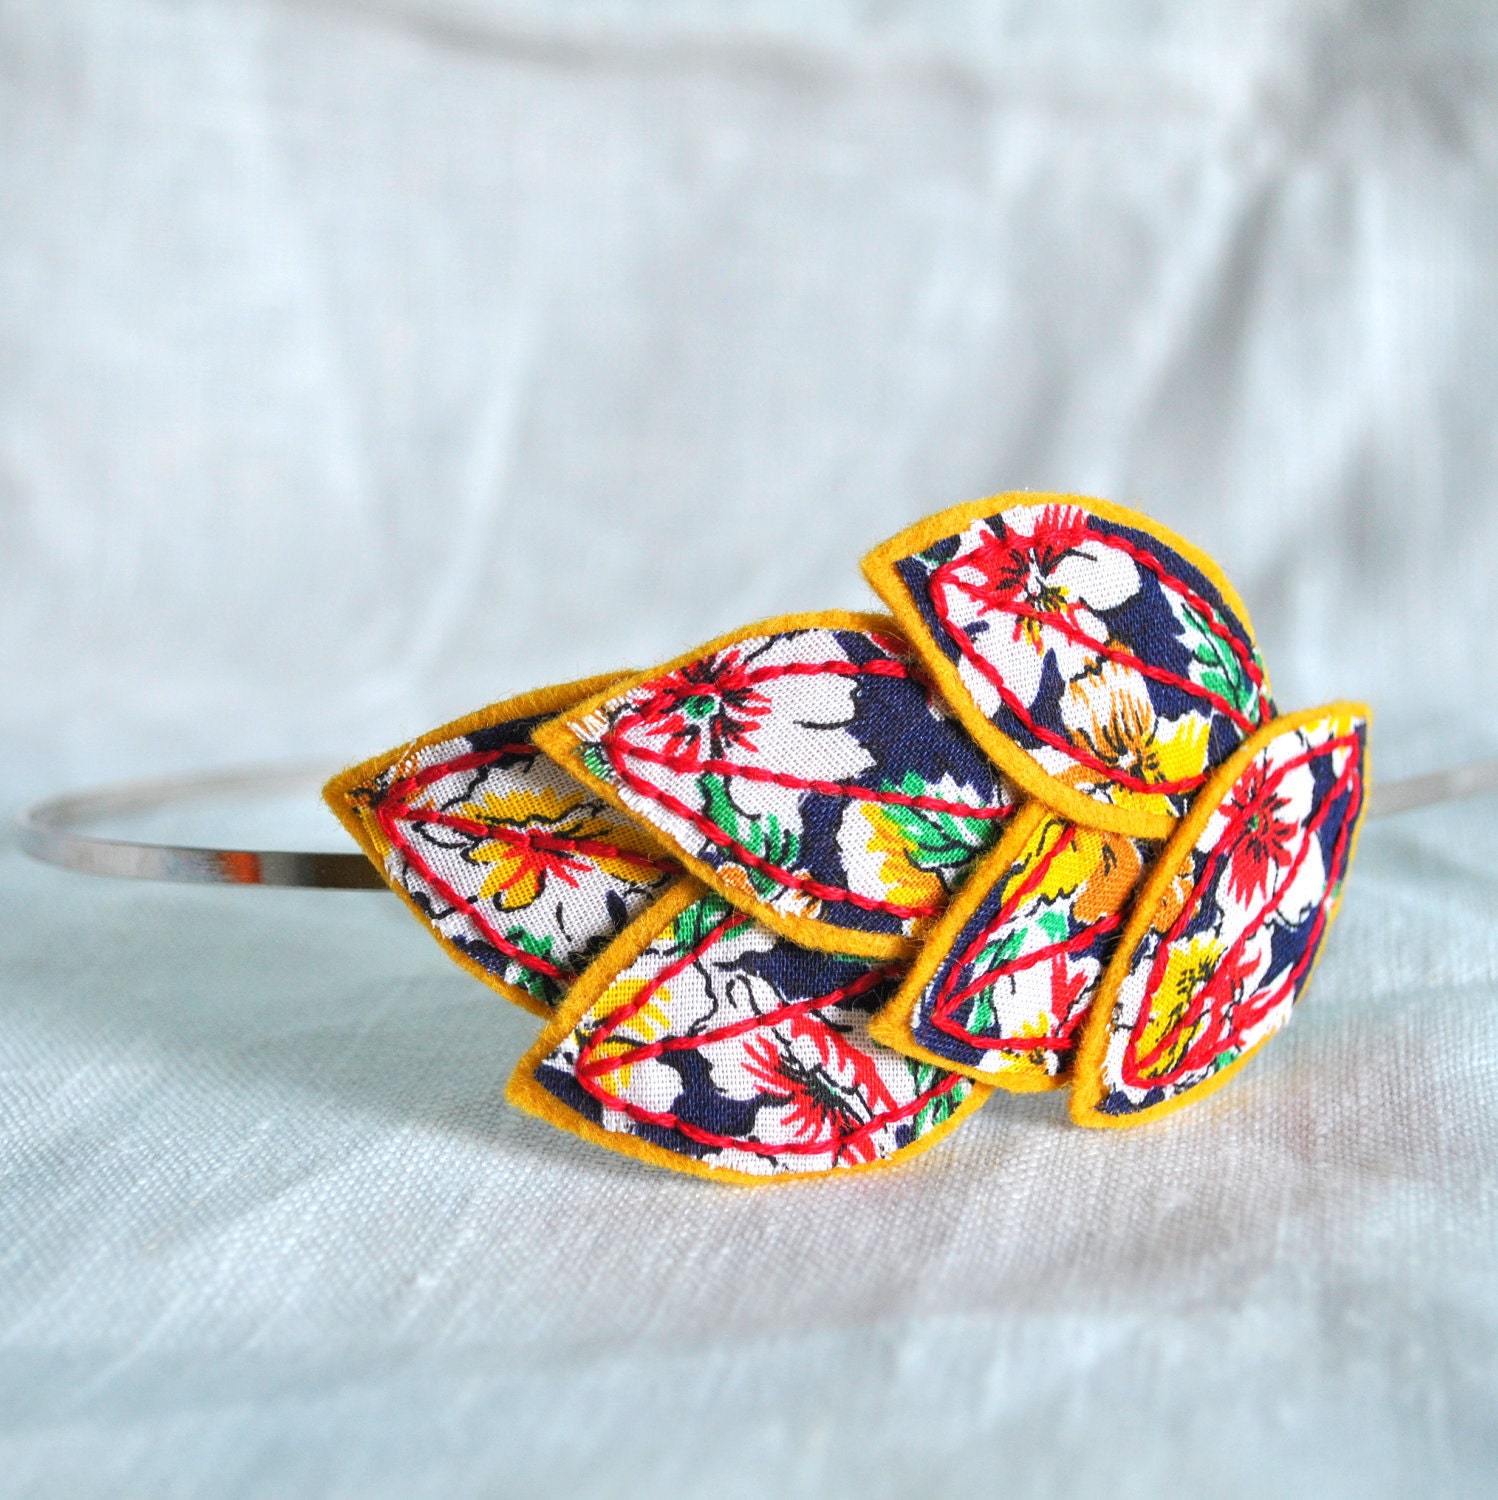 Leaf Headband - Red, Mustard Yellow and Navy Floral Print - Hand Embroidered